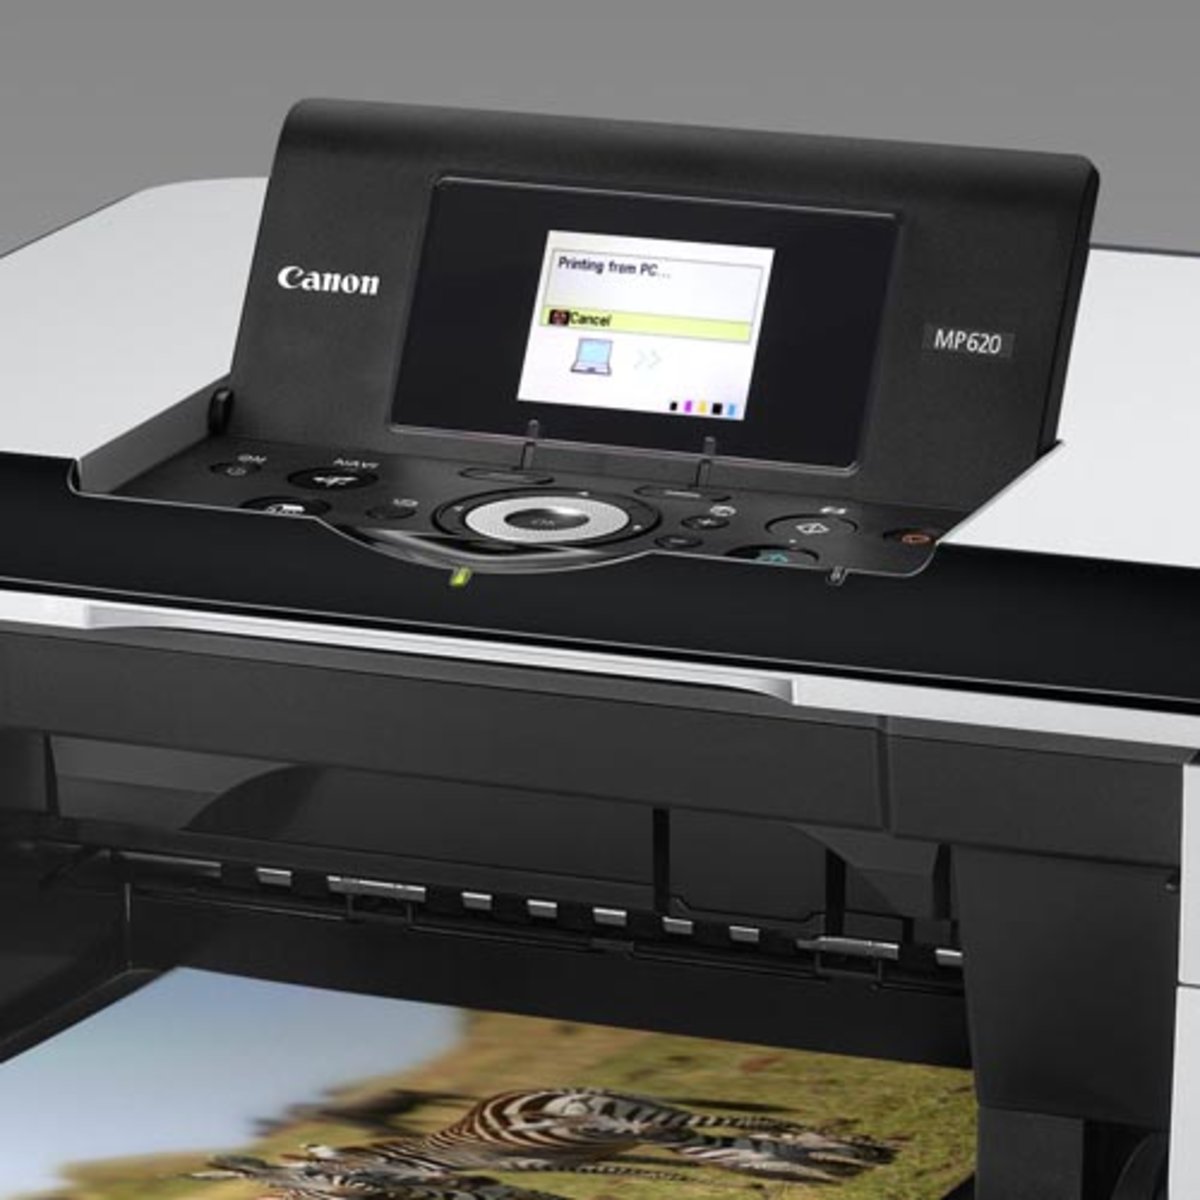 set up canon mp620 to print for mac